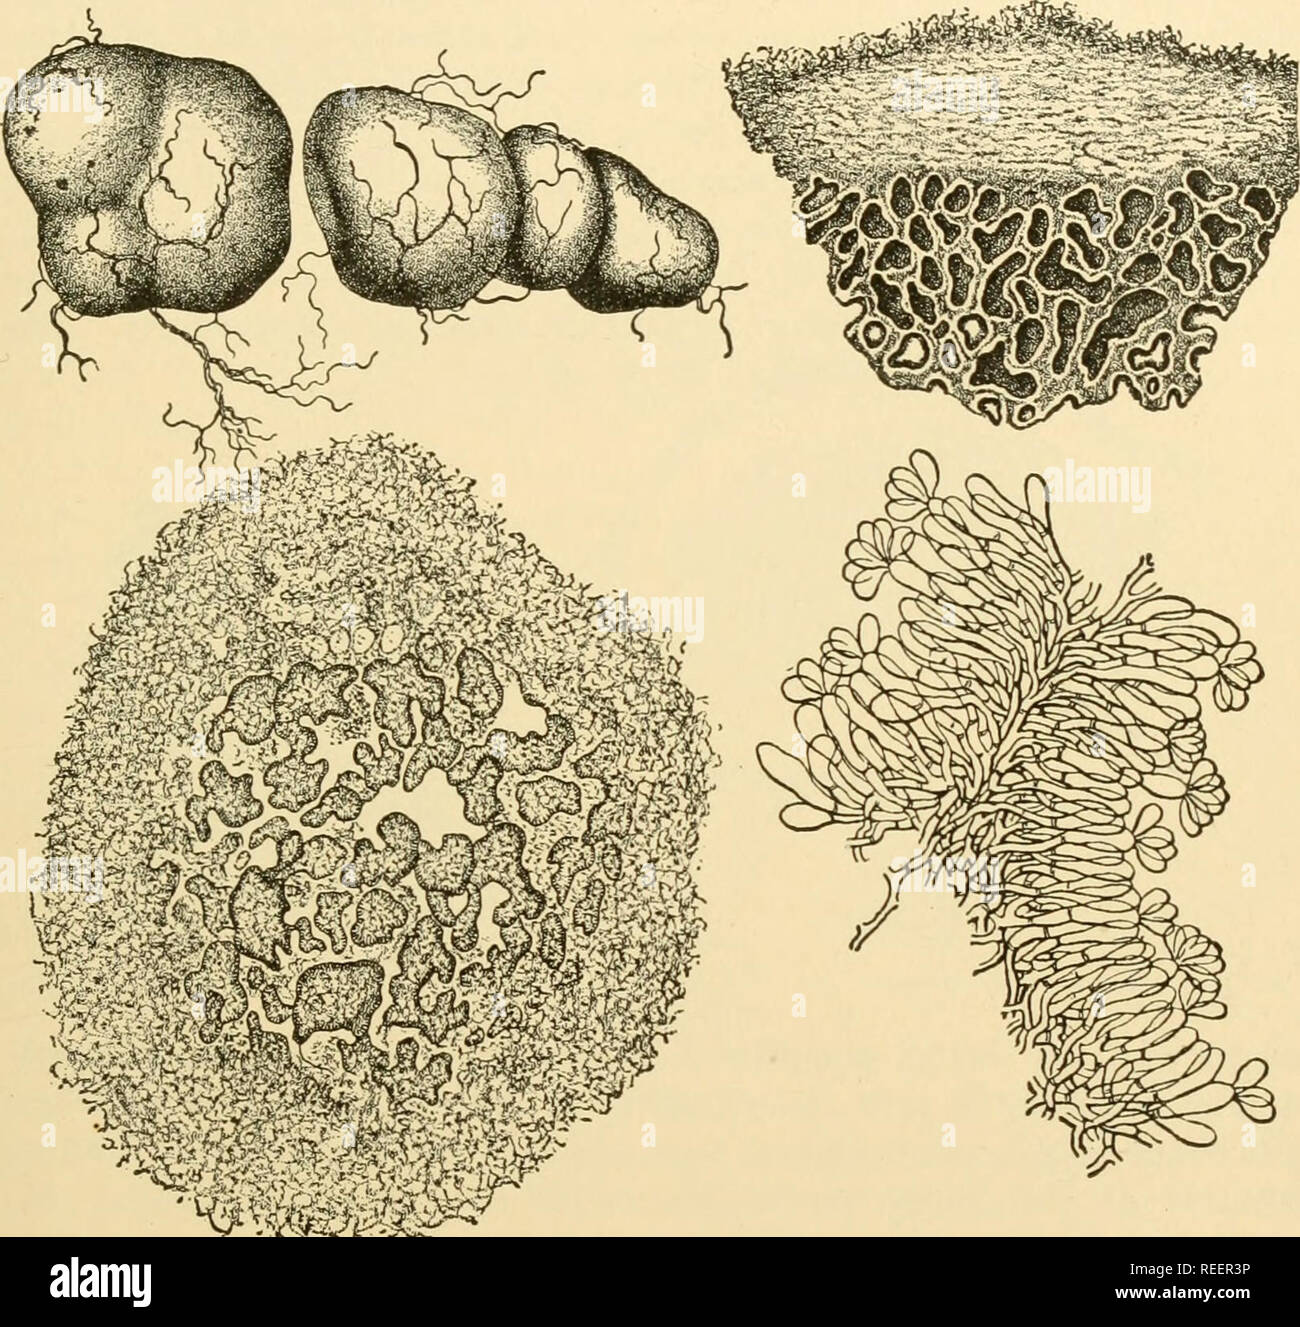 . Comparative morphology of Fungi. Fungi. GASTEROMYCETES 469 cation. Subsequently, the hyphae of the surface of the cavities come together into a hymenial palisade. By growth of the palisade, the tramal plates become increasingly irregular and finally occupy most of the gleba (Fig. 297, B). In some species, as R. luteolus, the trama tend to split, suggesting conditions in Pisolithus in the Sclerodermataceae. In other species there is differentiated, outside the ground tissue, a peridium which may be. m0§m&amp; Habit (natural size). Fig. 297.—Rhizopogon luteolus. A fructification (X 14). C. Par Stock Photo